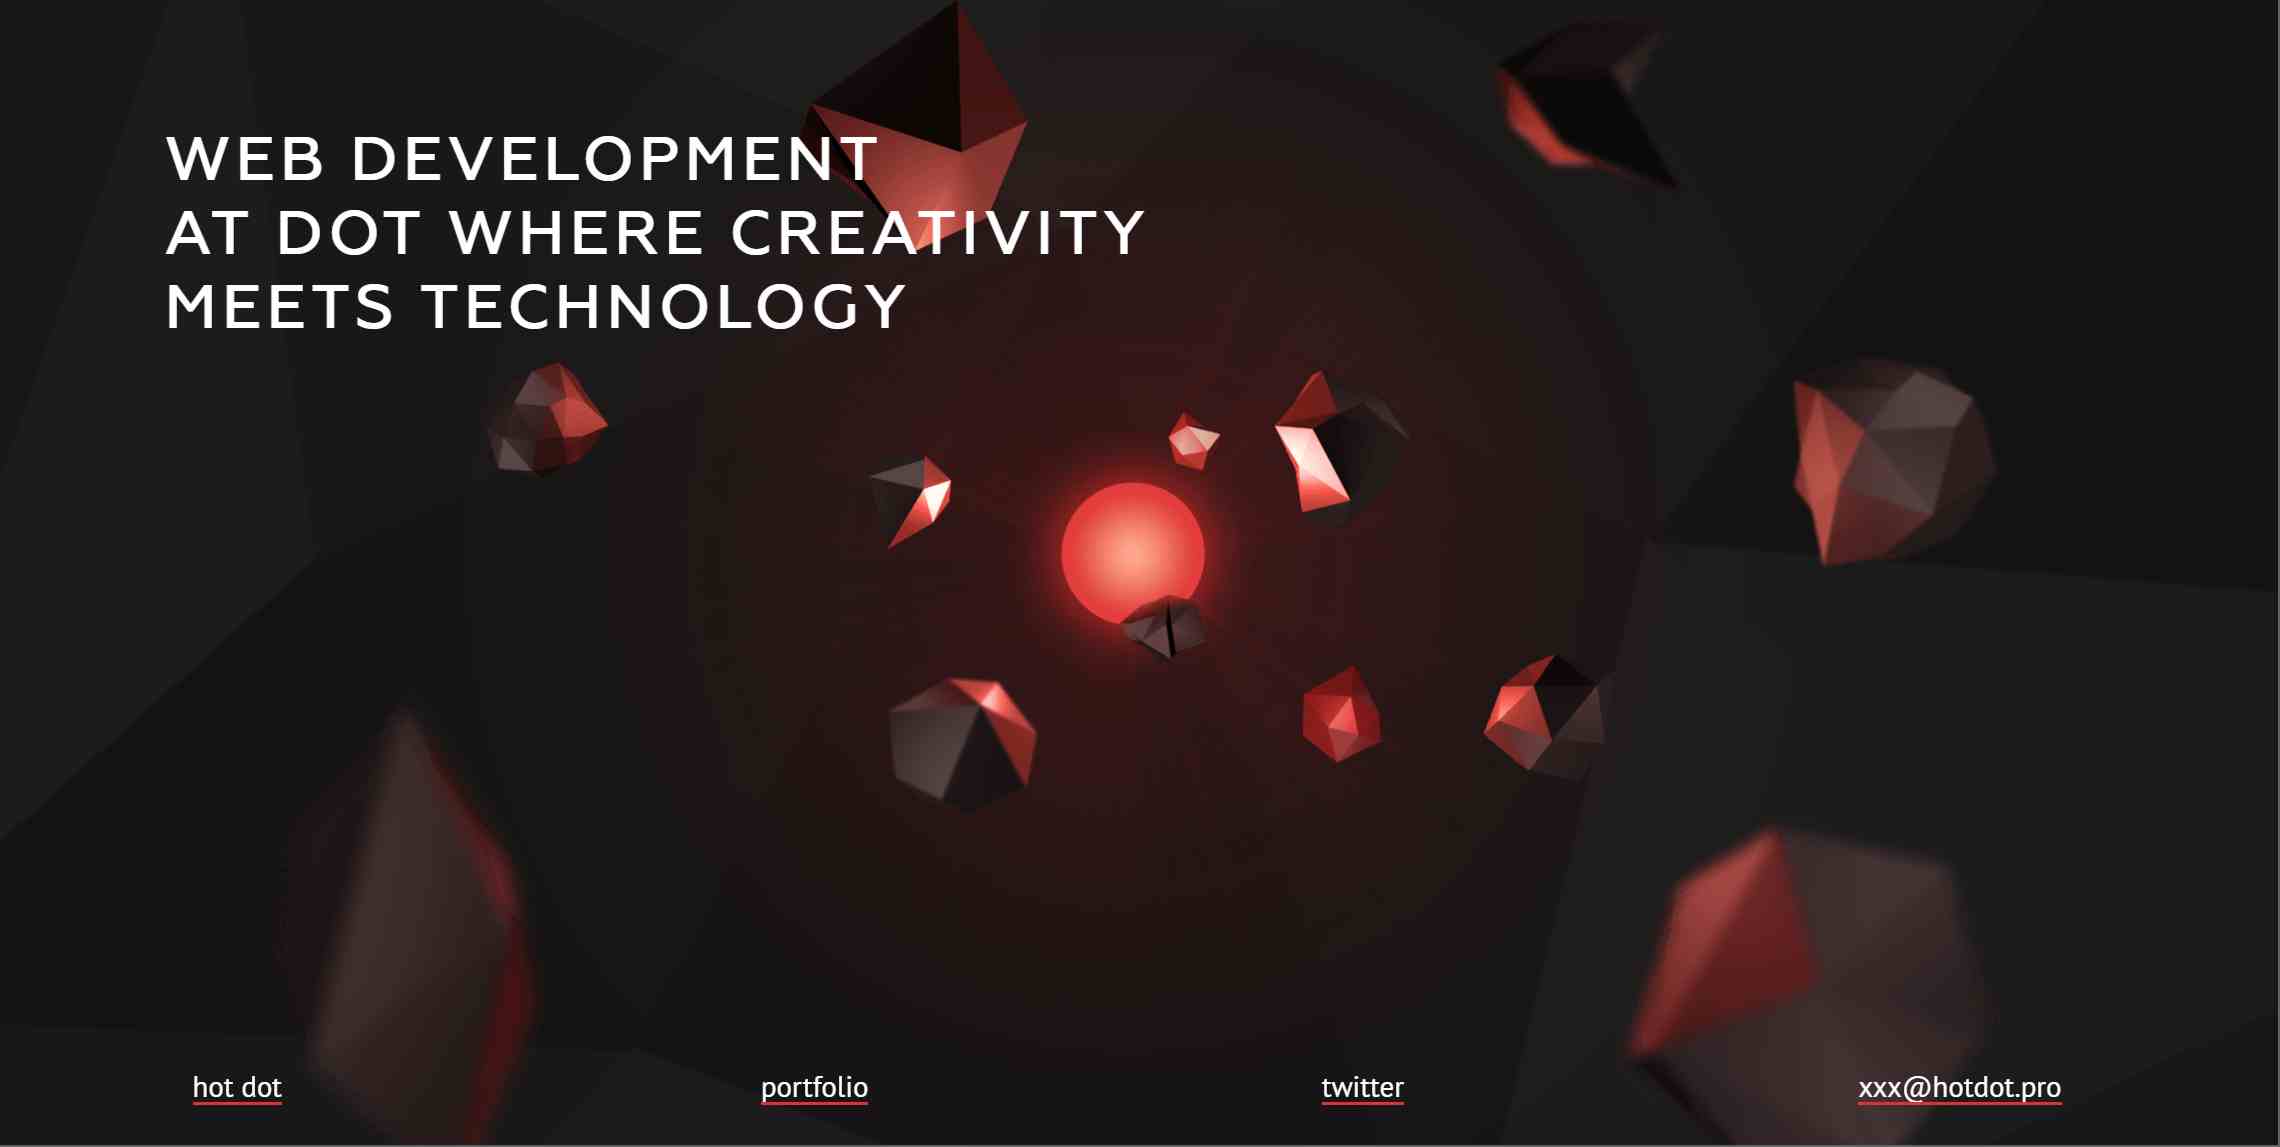 23-best-examples-of-parallax-scrolling-websites-to-inspire-you